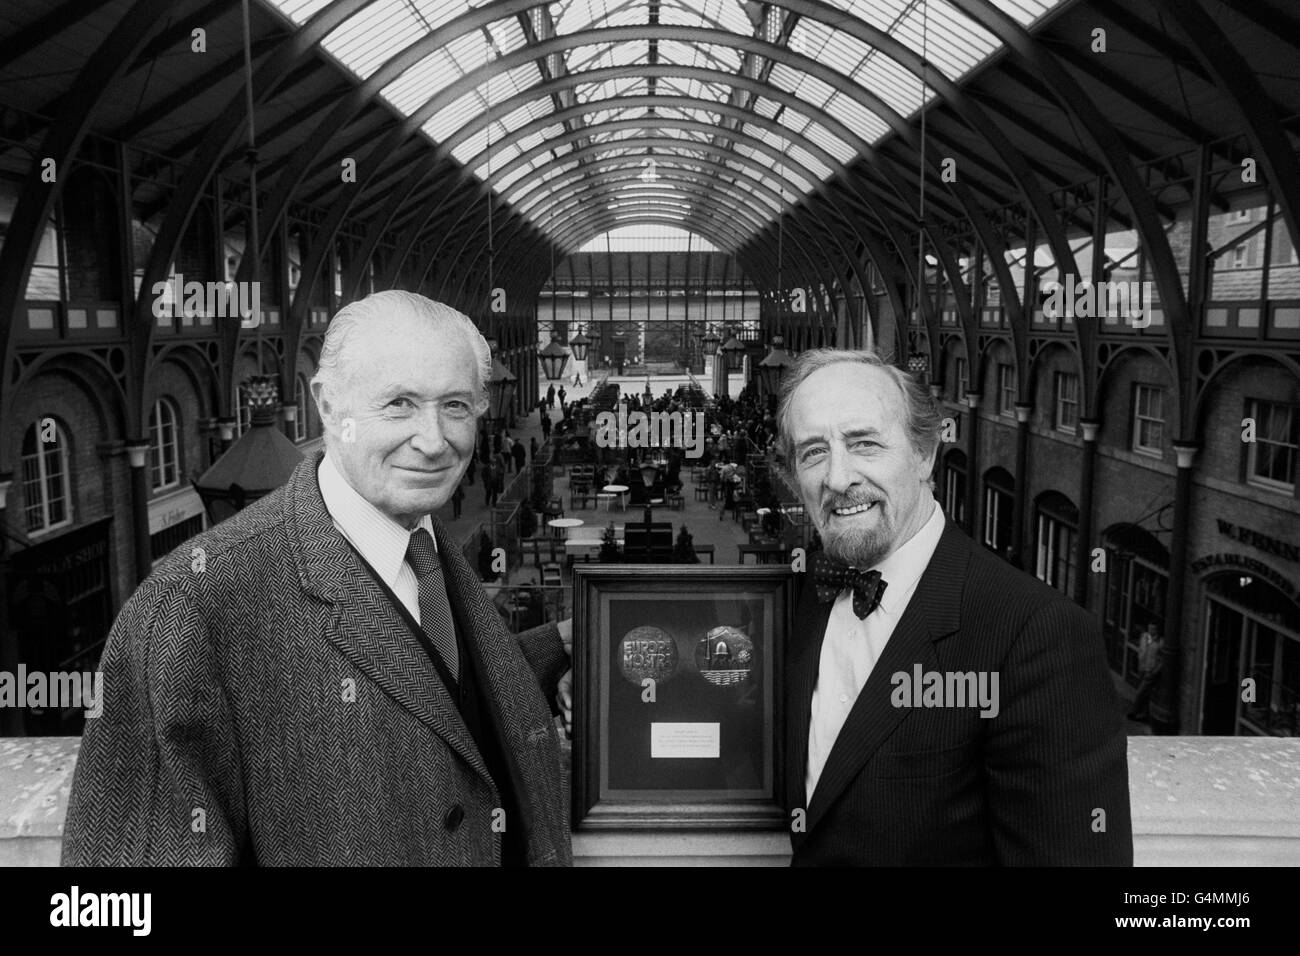 Lord Duncan-Sandys (l), president of Europa Nostra, after presenting the Europa Nostra medal to Sir Horace Cutler (r), leader of the Greater London council, at Covent Garden. The medal has been awarded to the GLC for the restoration of the former central market building (background). The award, designed and donated by Franklin Mint of London, consist of a specially minted medal mounted in a mahogany frame with a plaque bearing a description of the project. Stock Photo